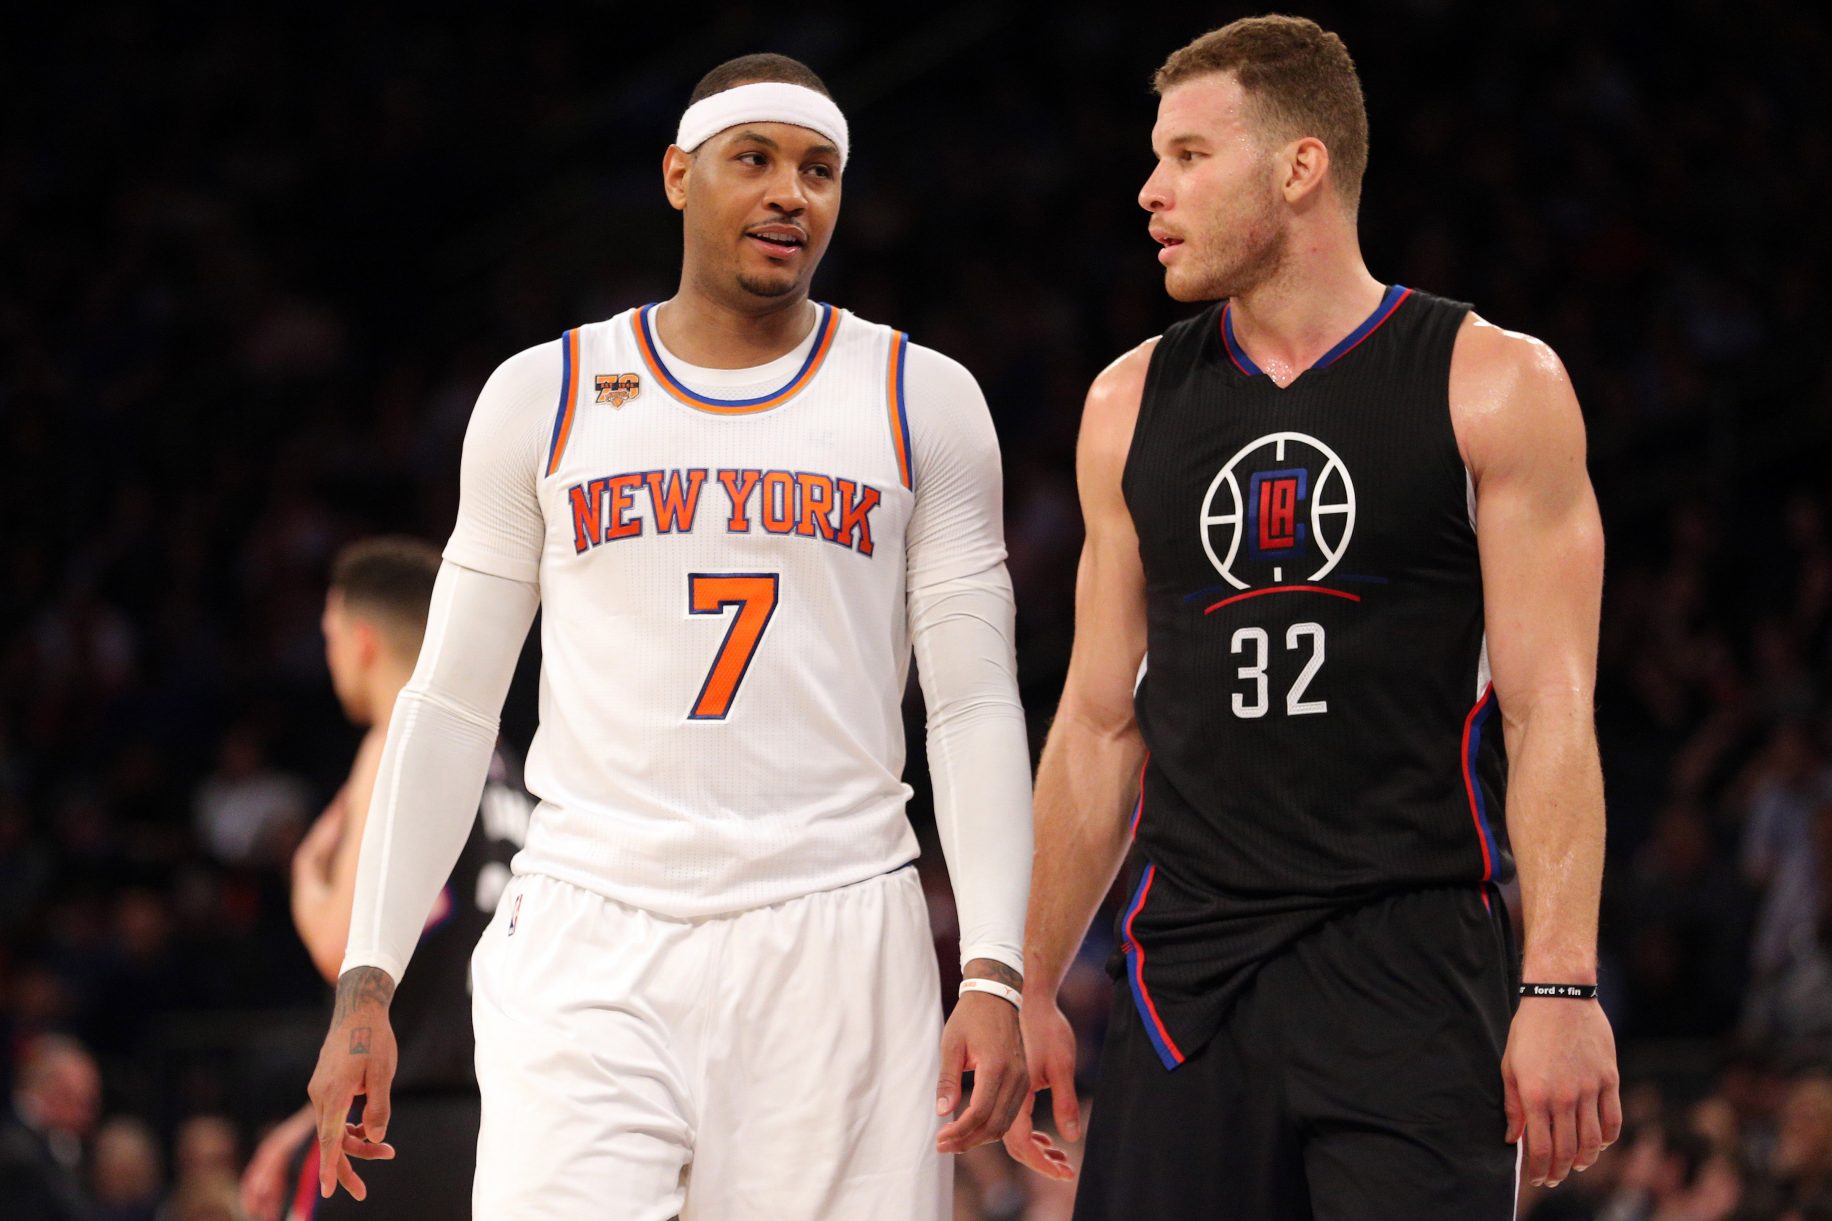 Why Would Knicks' Carmelo Anthony Want to Join the Los Angeles Clippers? 4